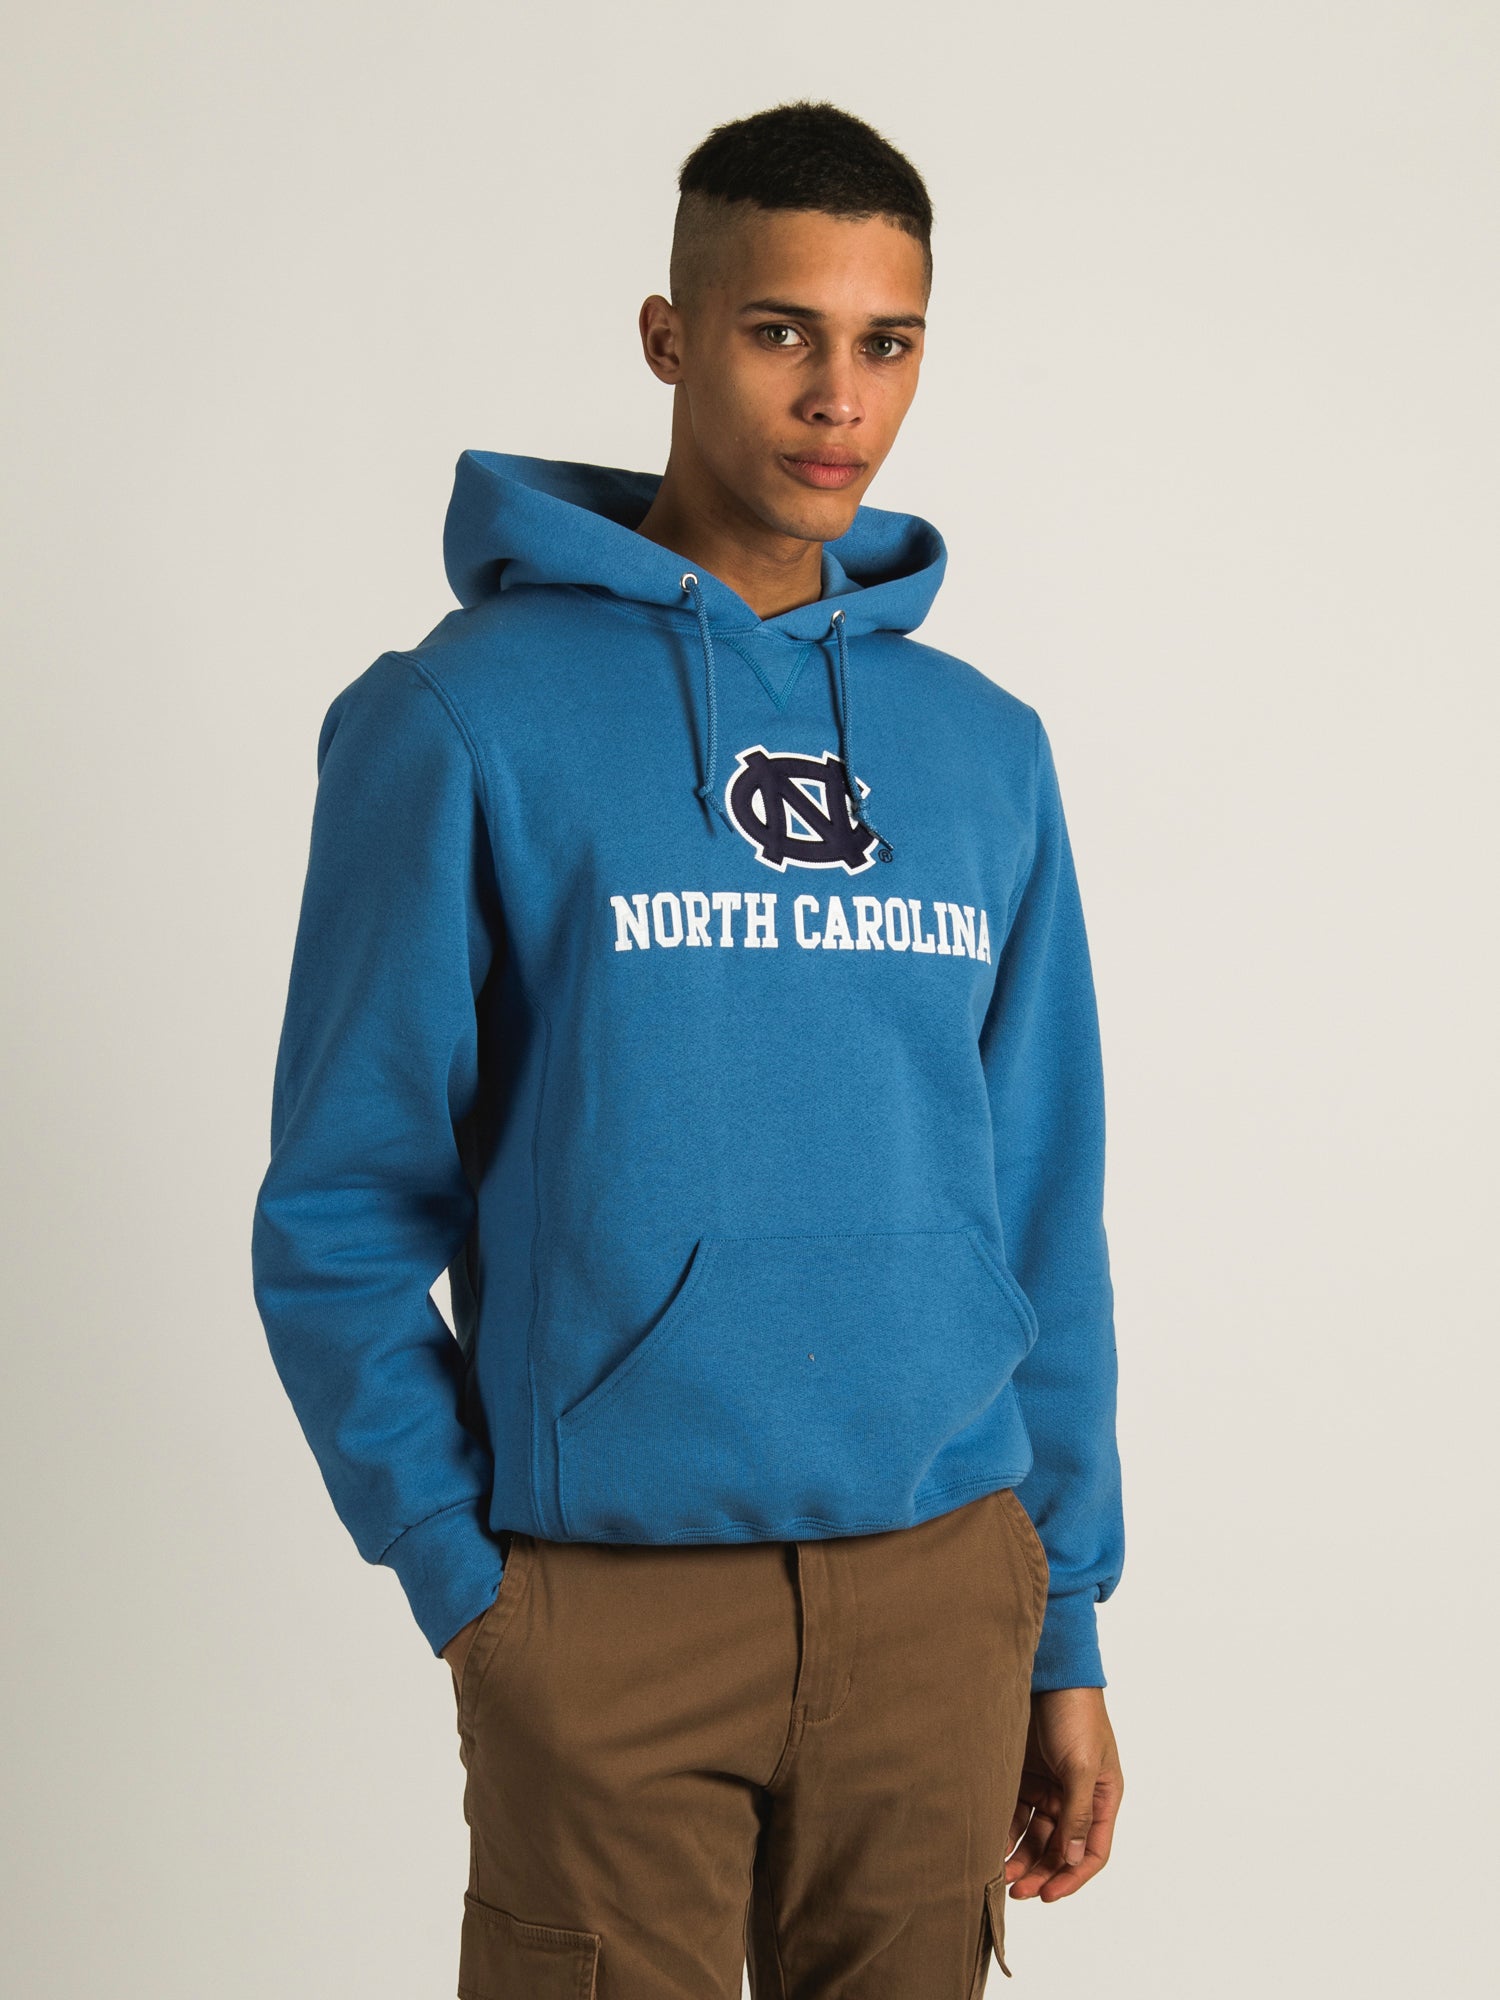 What Are the Differences Between Men's and Women's Hoodies? – Boathouse